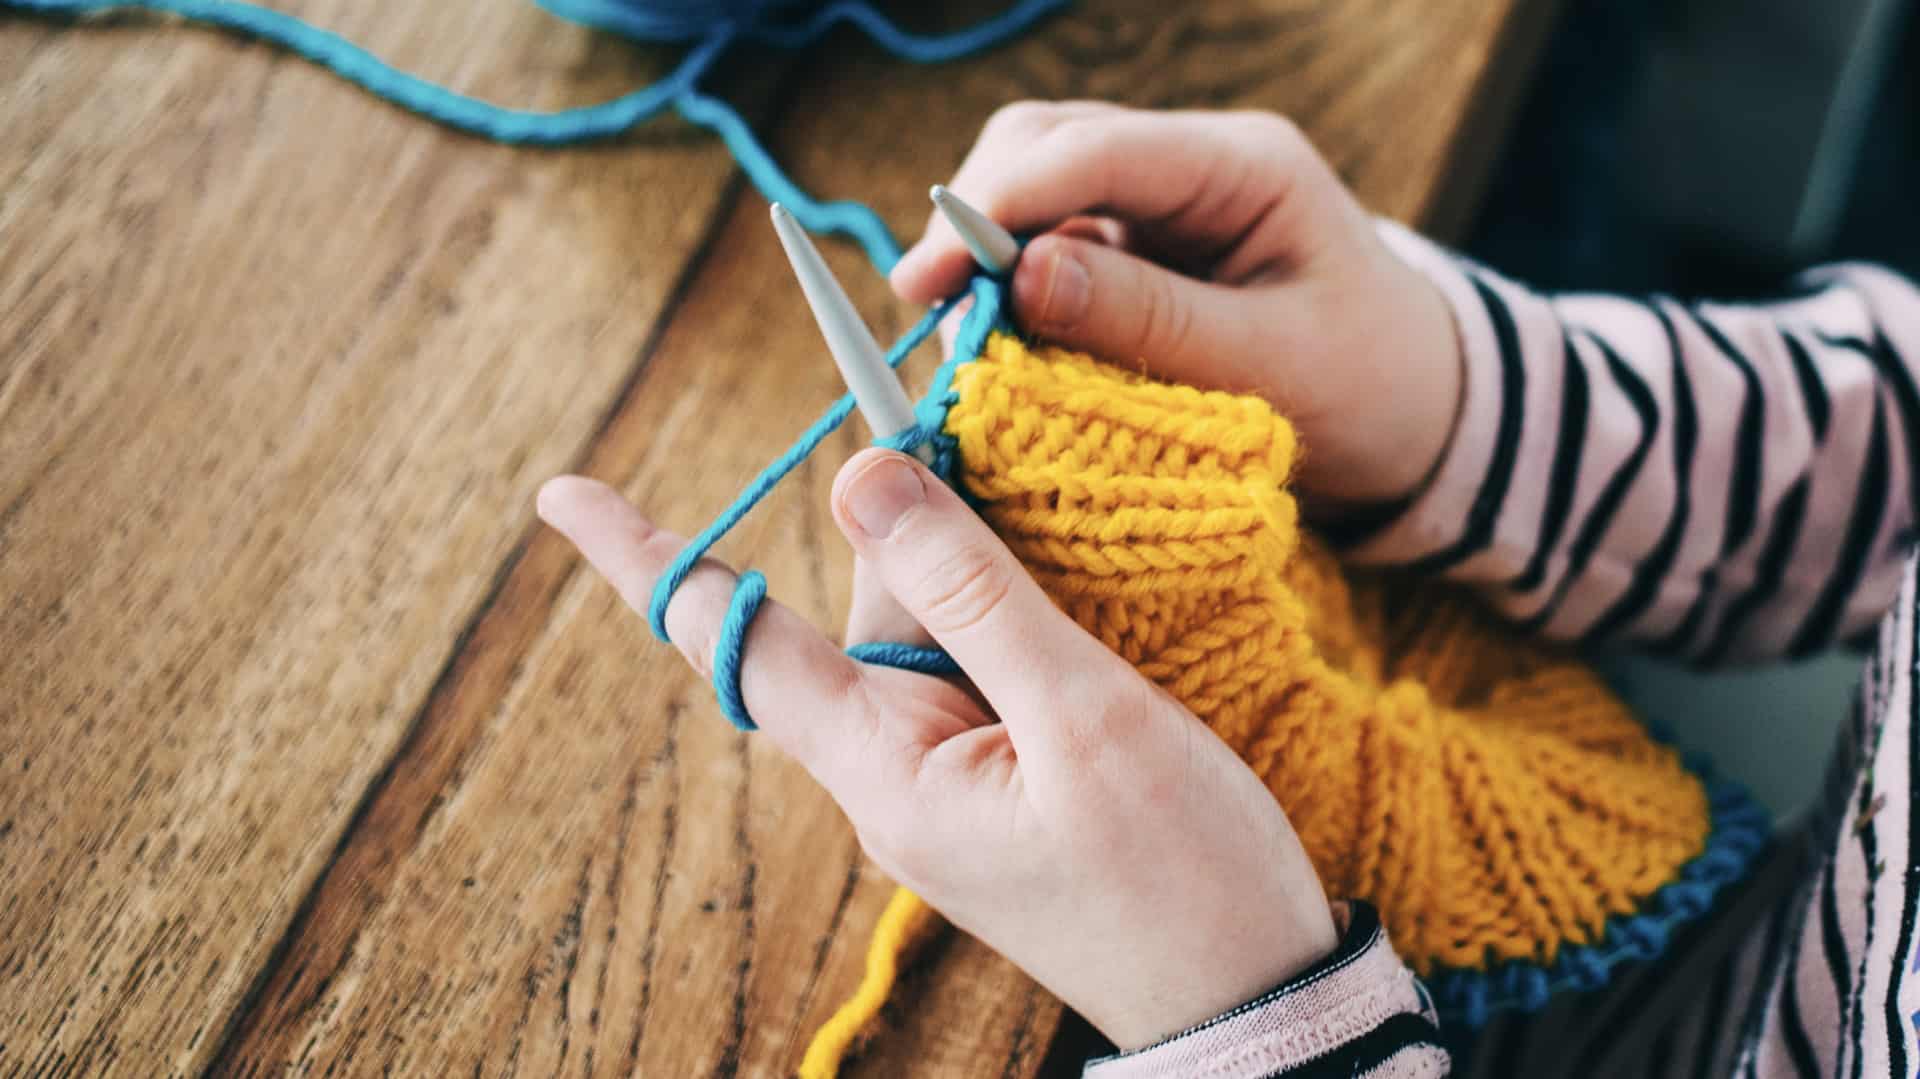 a young girl knitting a circle scarf with yellow and blue colored yarn